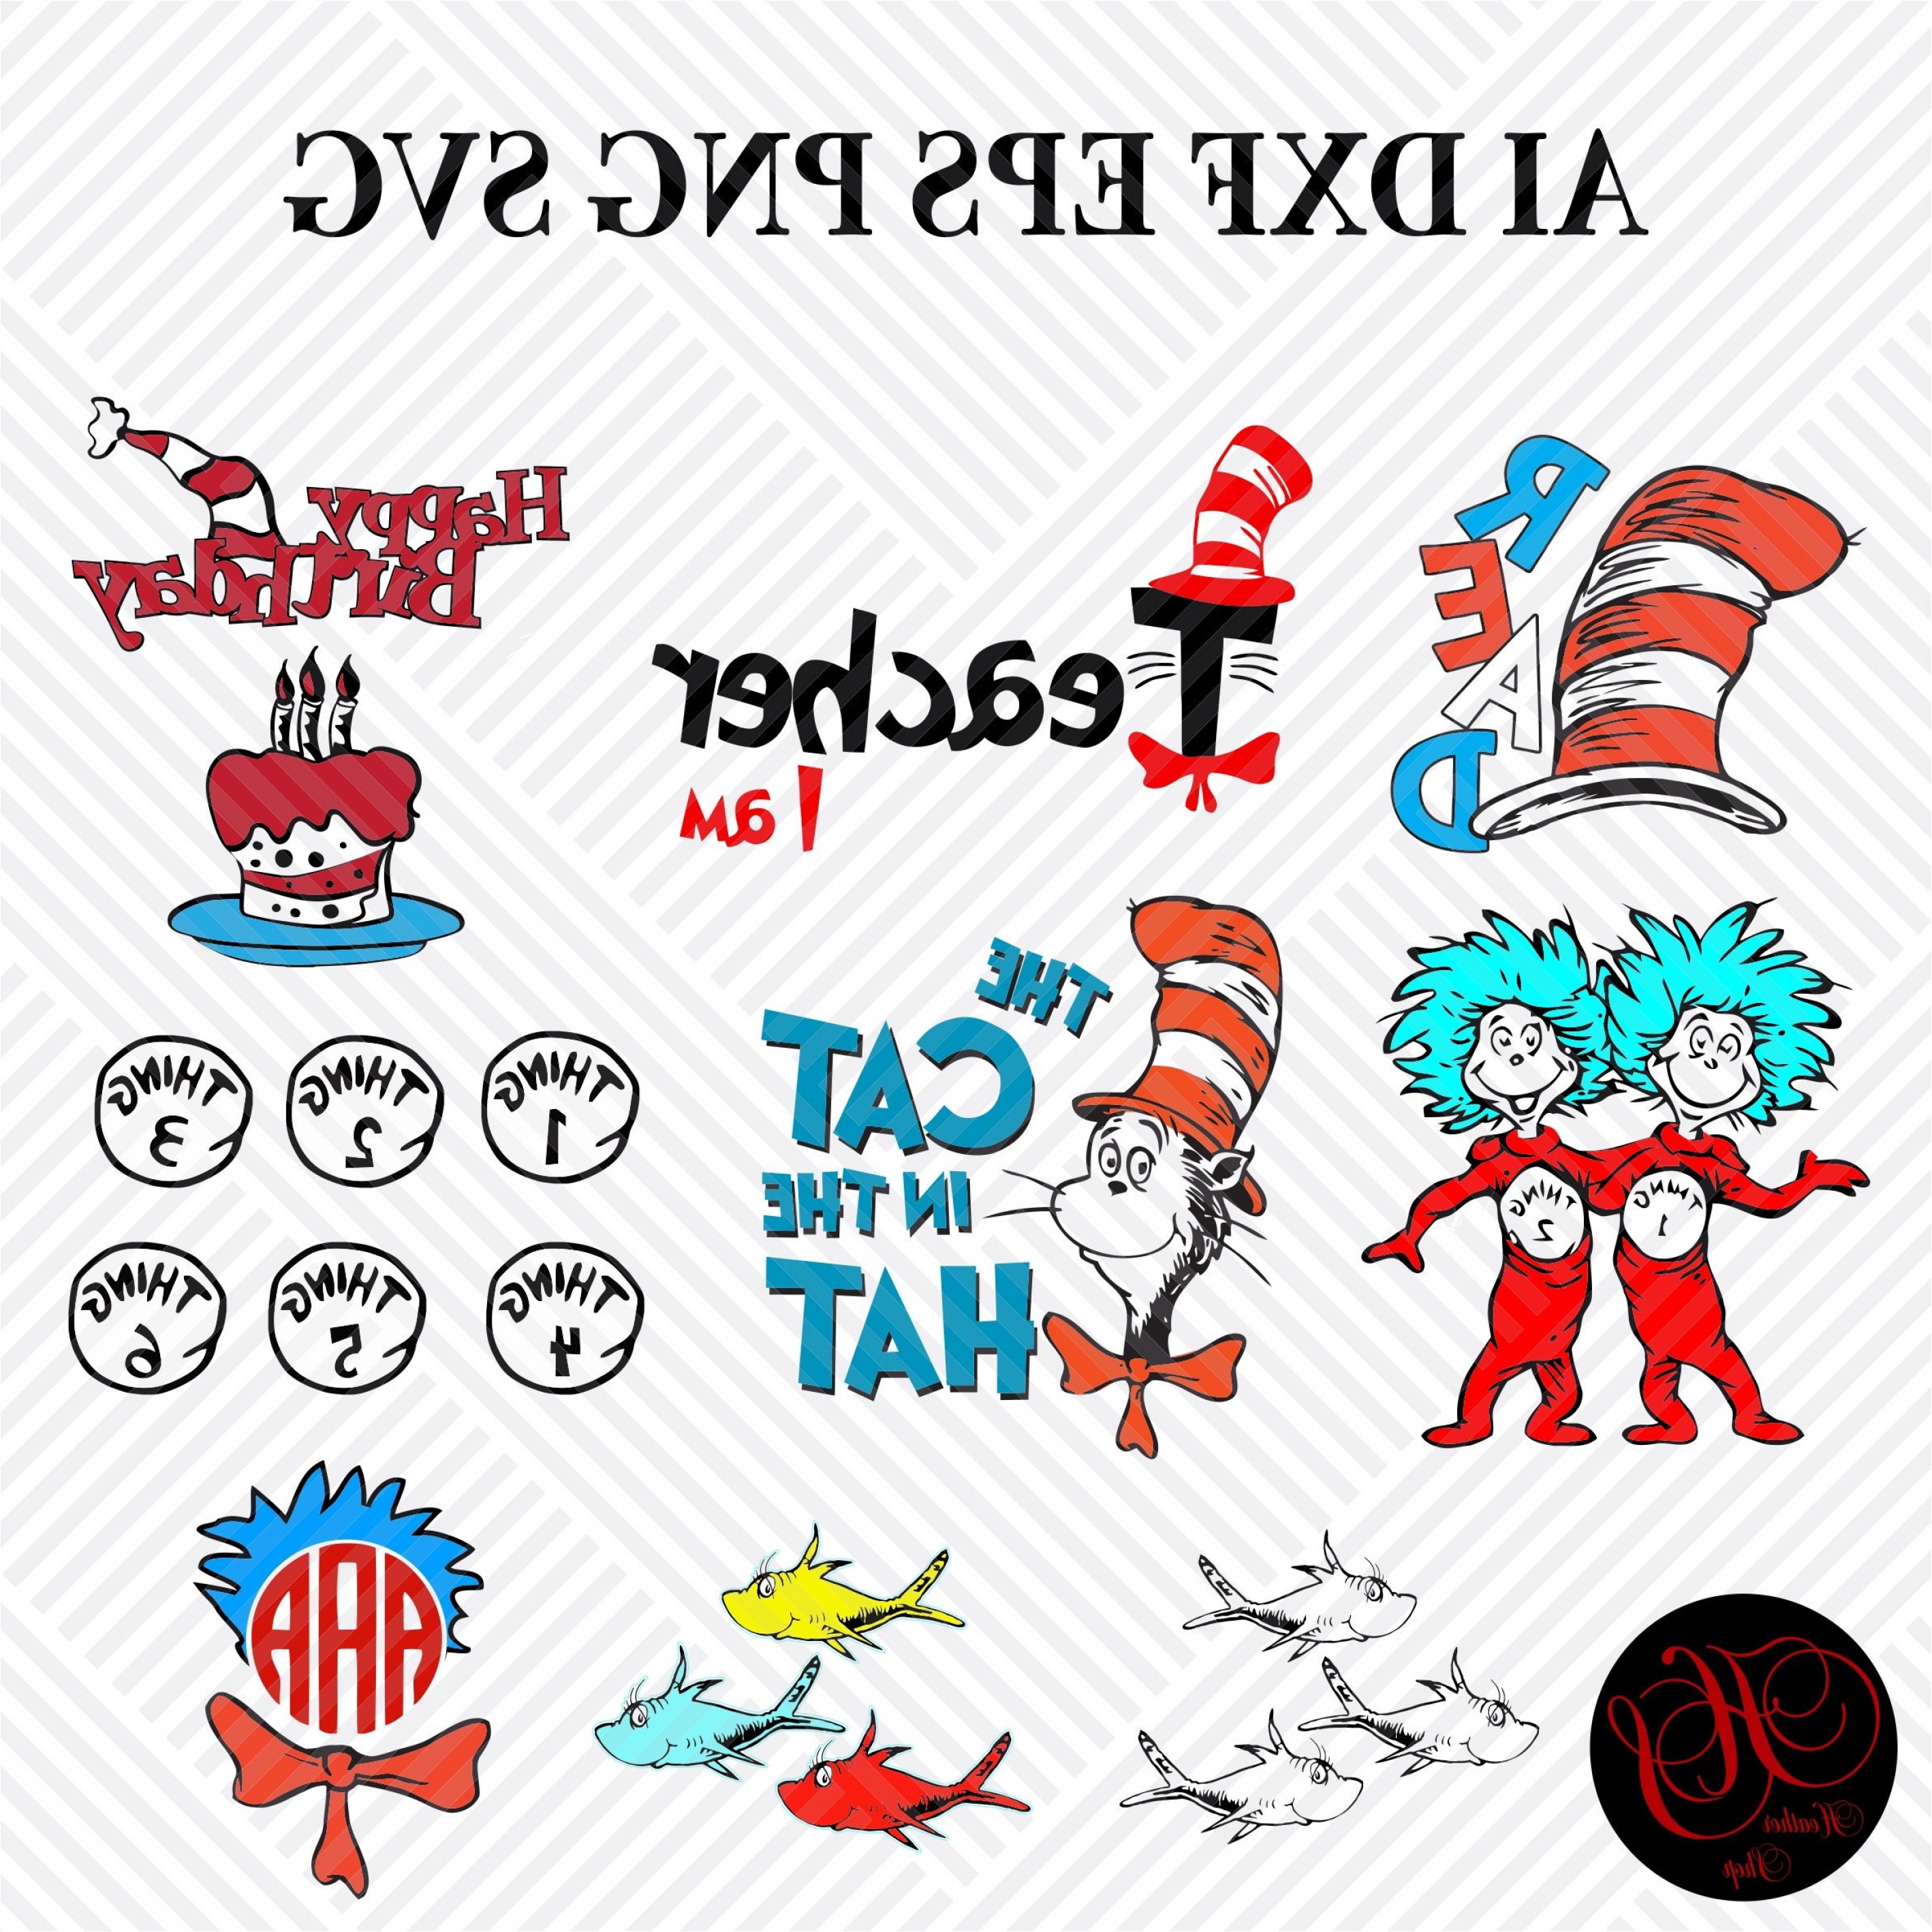 The best free Dr seuss vector images. Download from 164 free vectors of